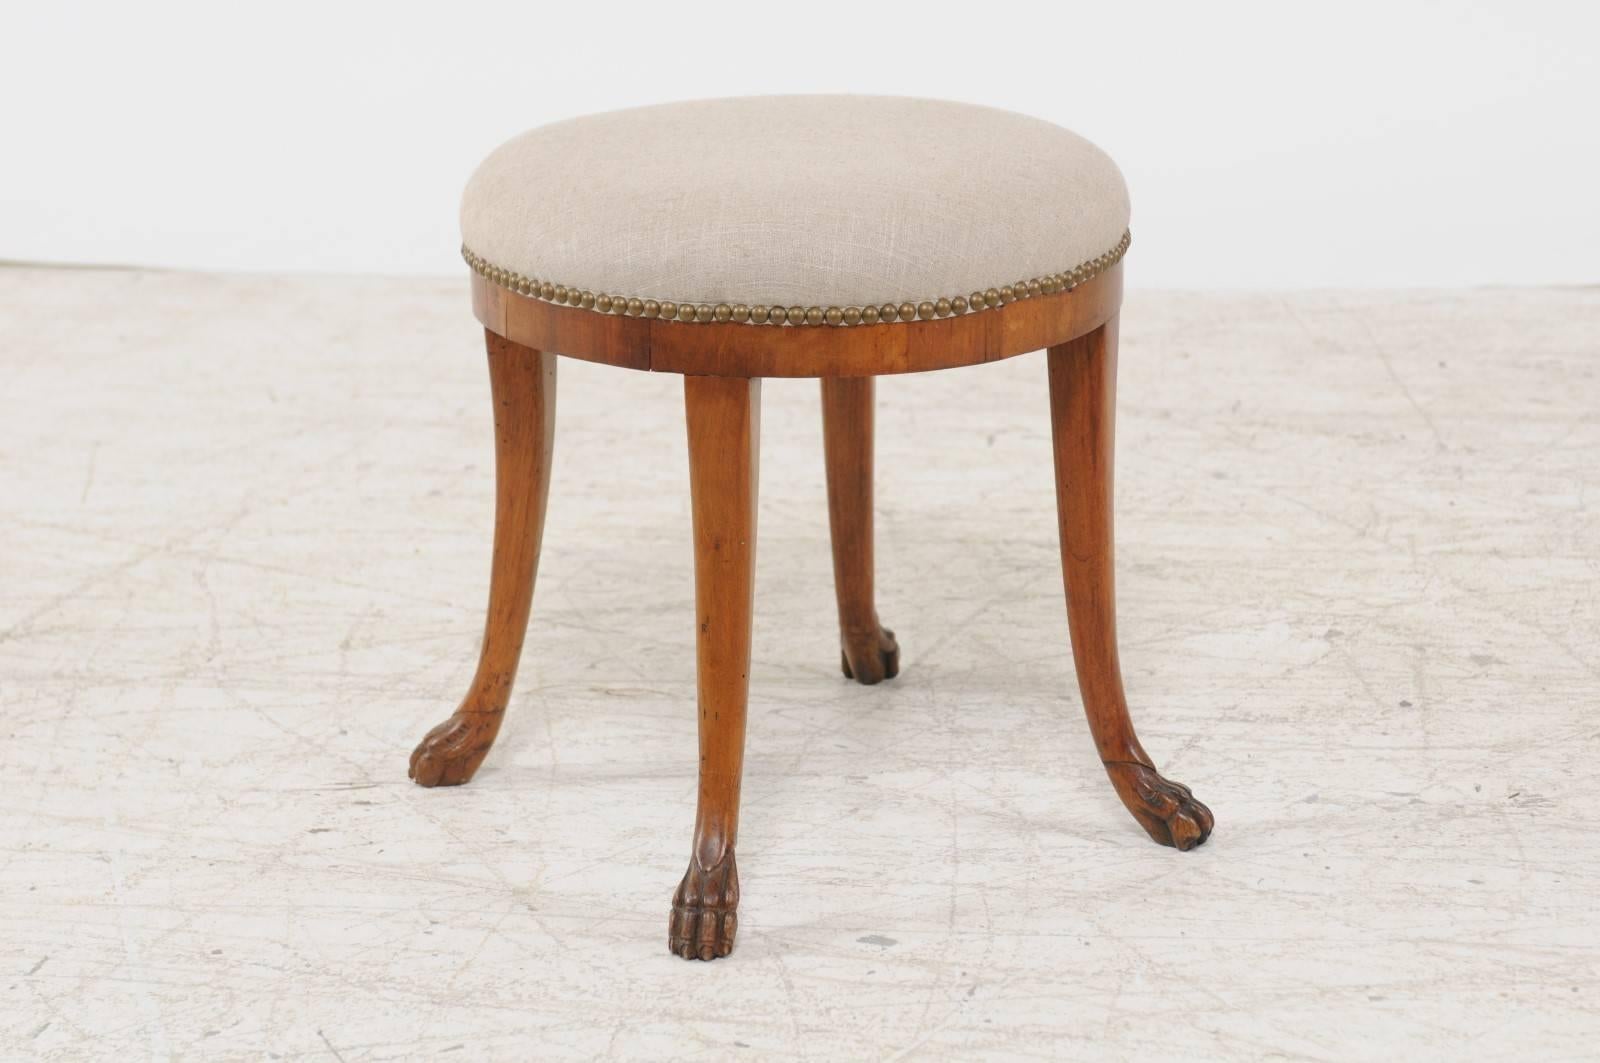 An Austrian Biedermeier round stool with saber legs and lion paw feet from the mid 19th century and new linen upholstery. This Austrian stool features a circular top, recovered with a new linen upholstery. The stool is raised on four saber legs